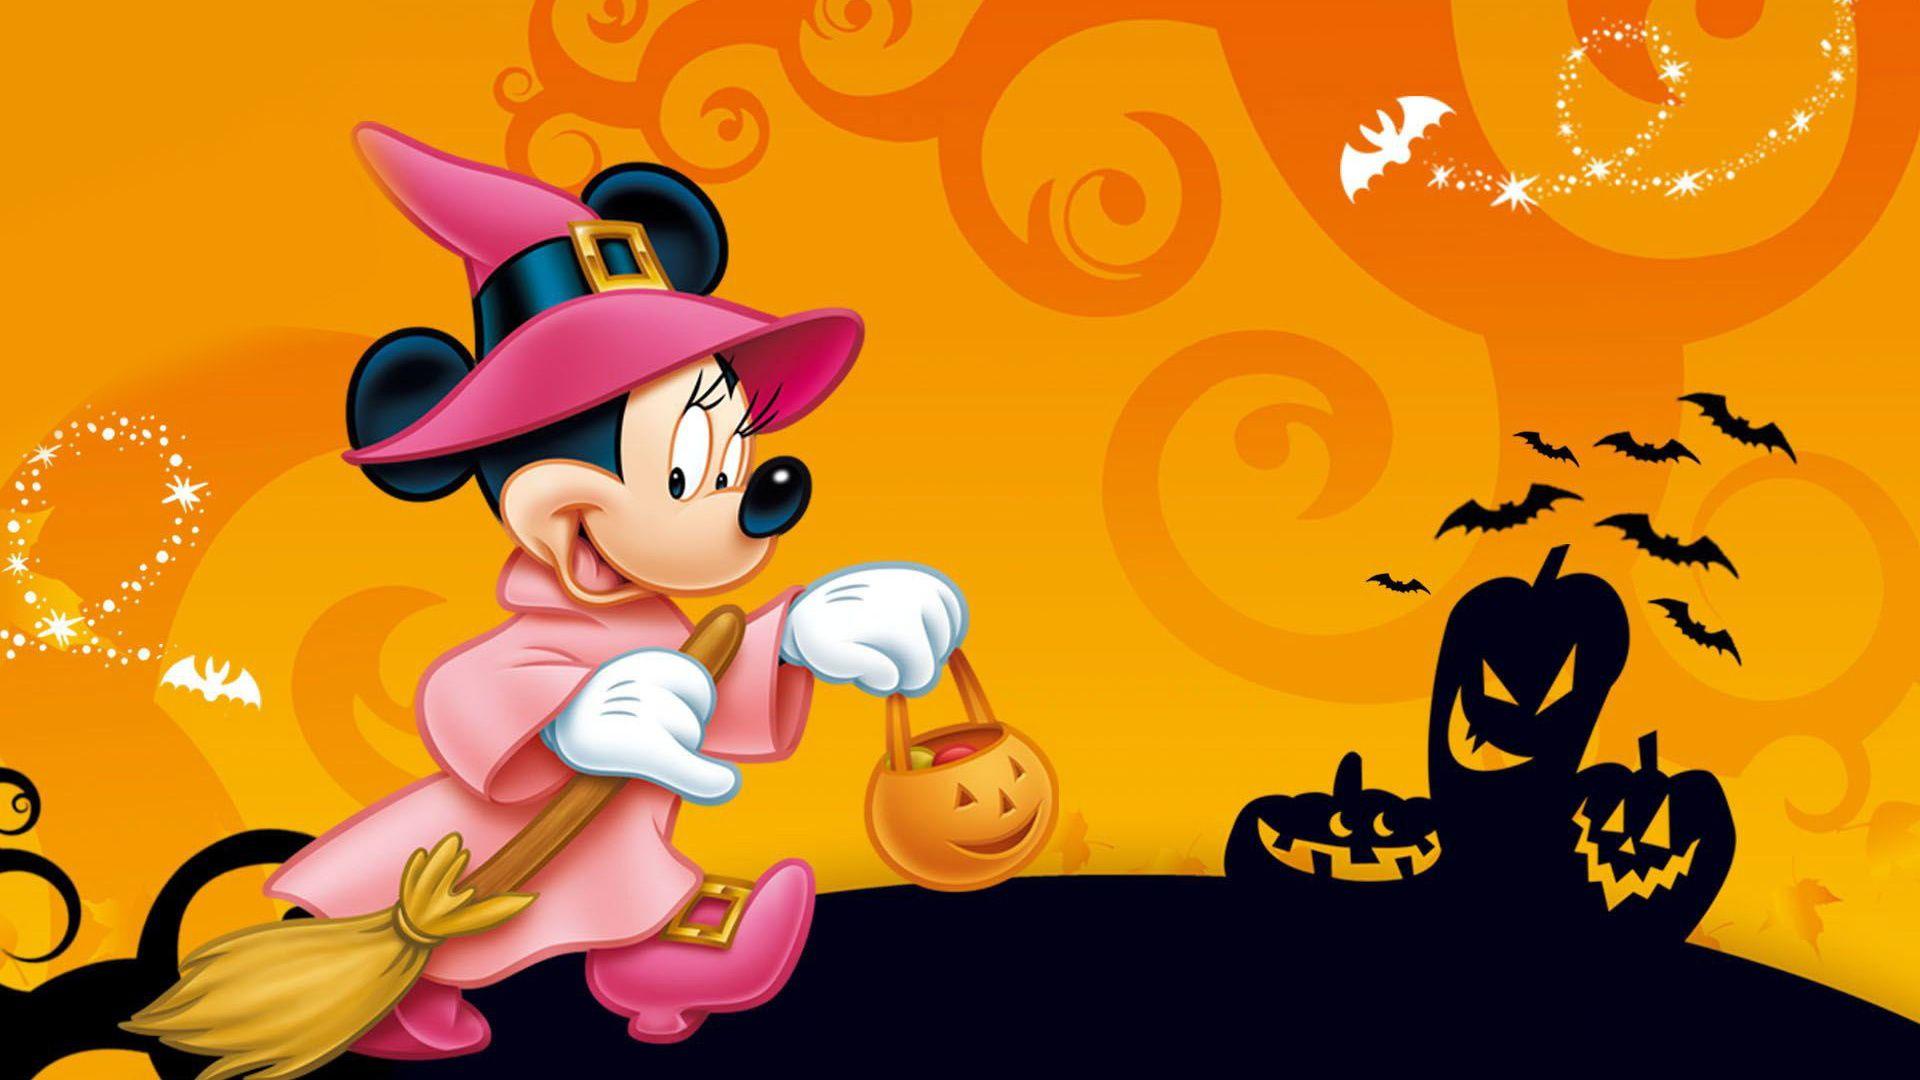 Give Your Device A Disney Halloween Makeover With New Wallpapers  the  disney food blog